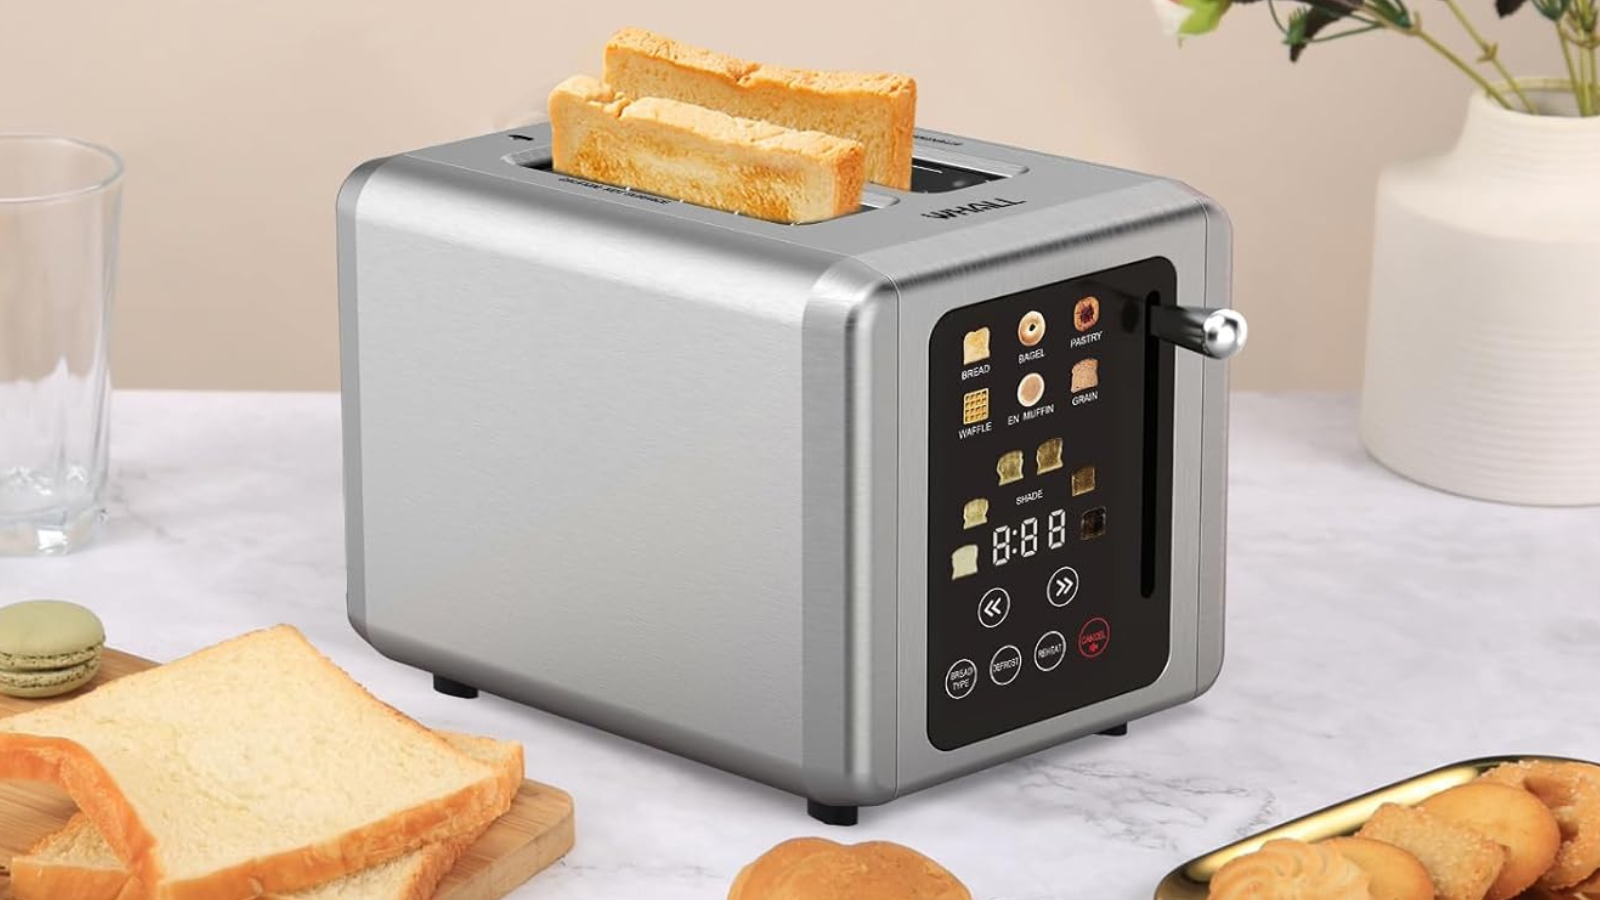 This viral touchscreen toaster is straight out of 'The Jetsons' — and it's a hot $50 for Memorial Day